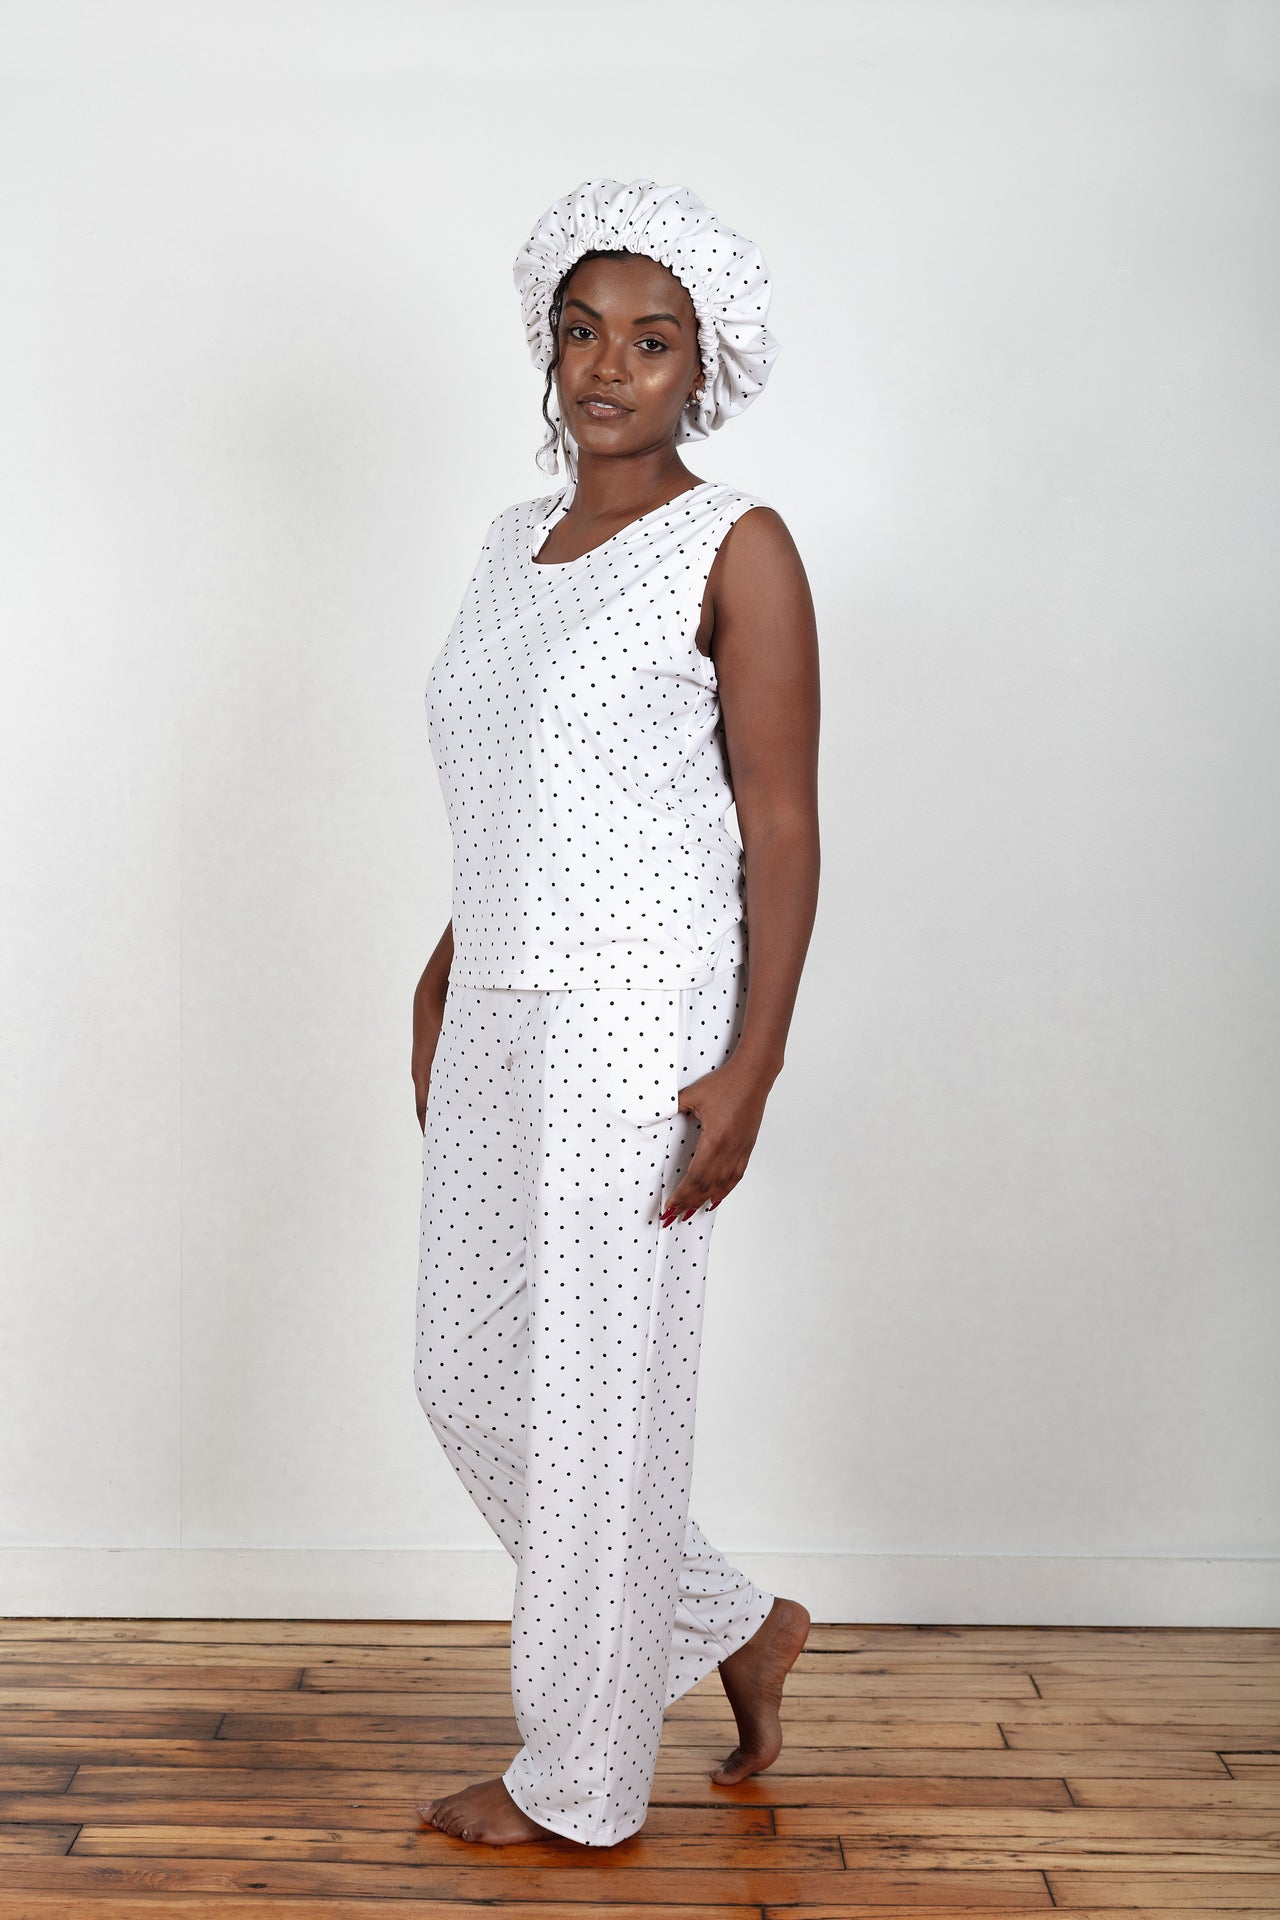 Soft and comfy Bamboo fabric, White and Black Polka Dots women's sleepwear/loungewear. Women's Pajama pants set with a Matching satin-lined bonnet.